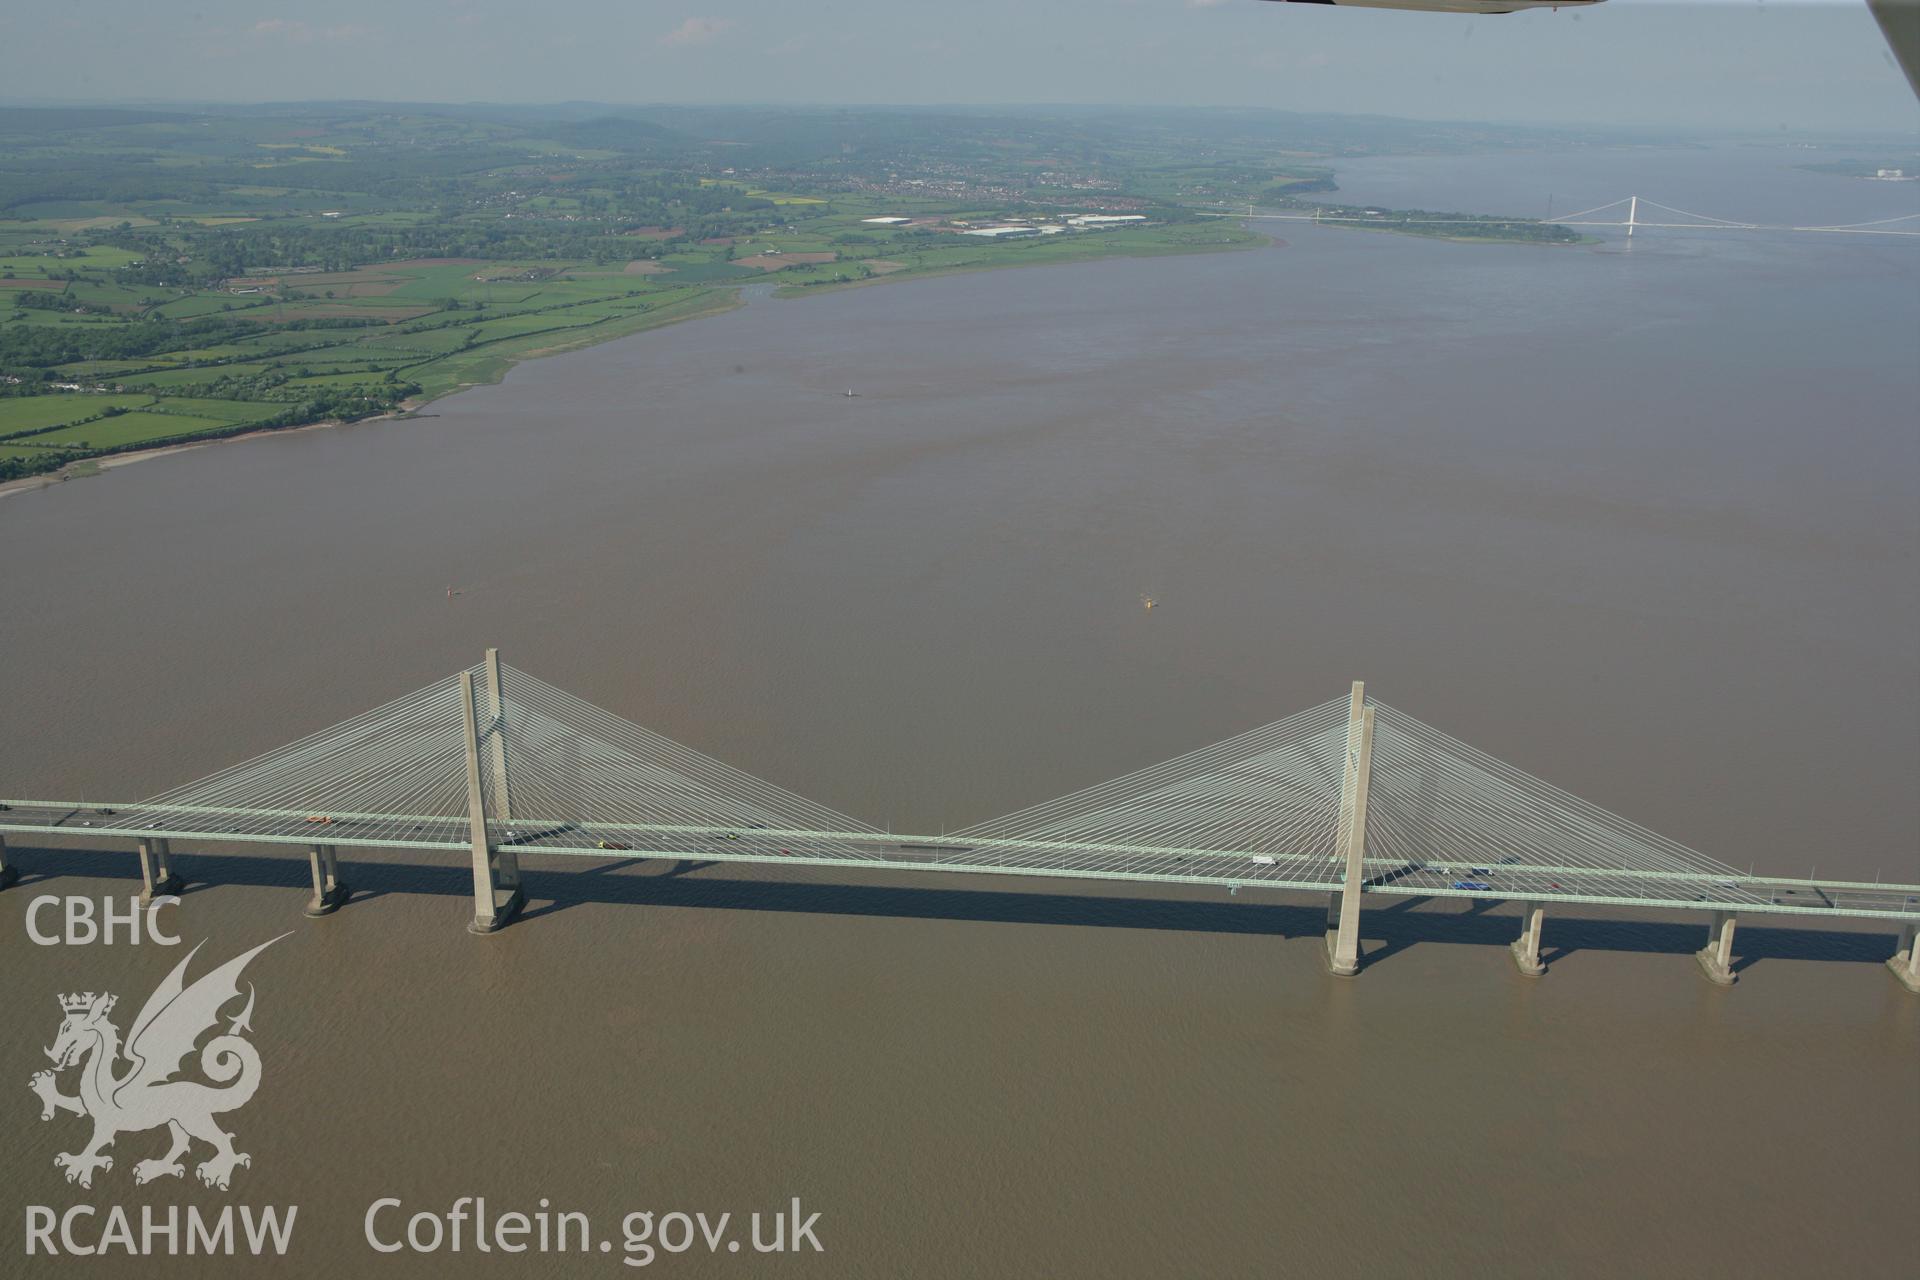 RCAHMW colour oblique photograph of Second Severn Crossing, M4 motorway. Taken by Toby Driver on 24/05/2010.